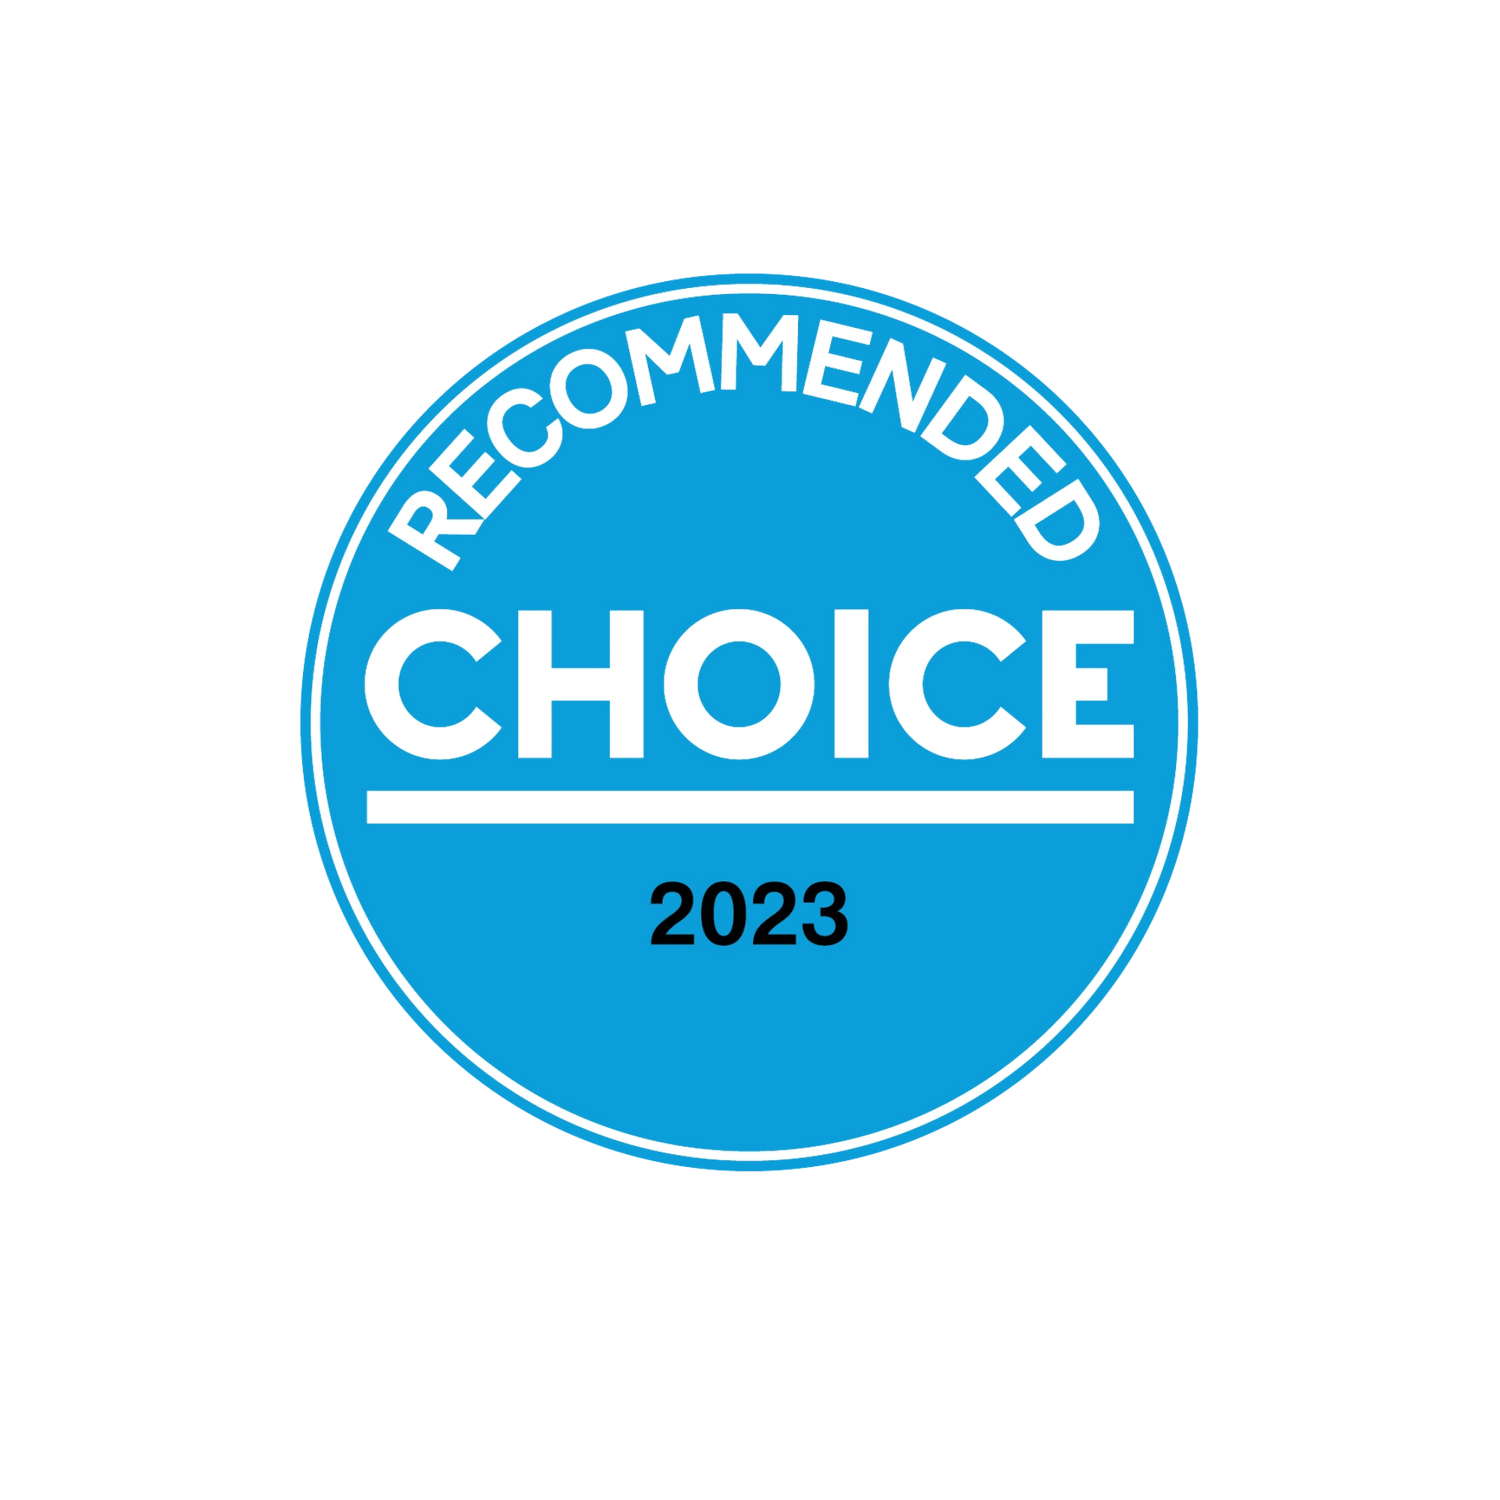 CHOICE recommended 2023 logo